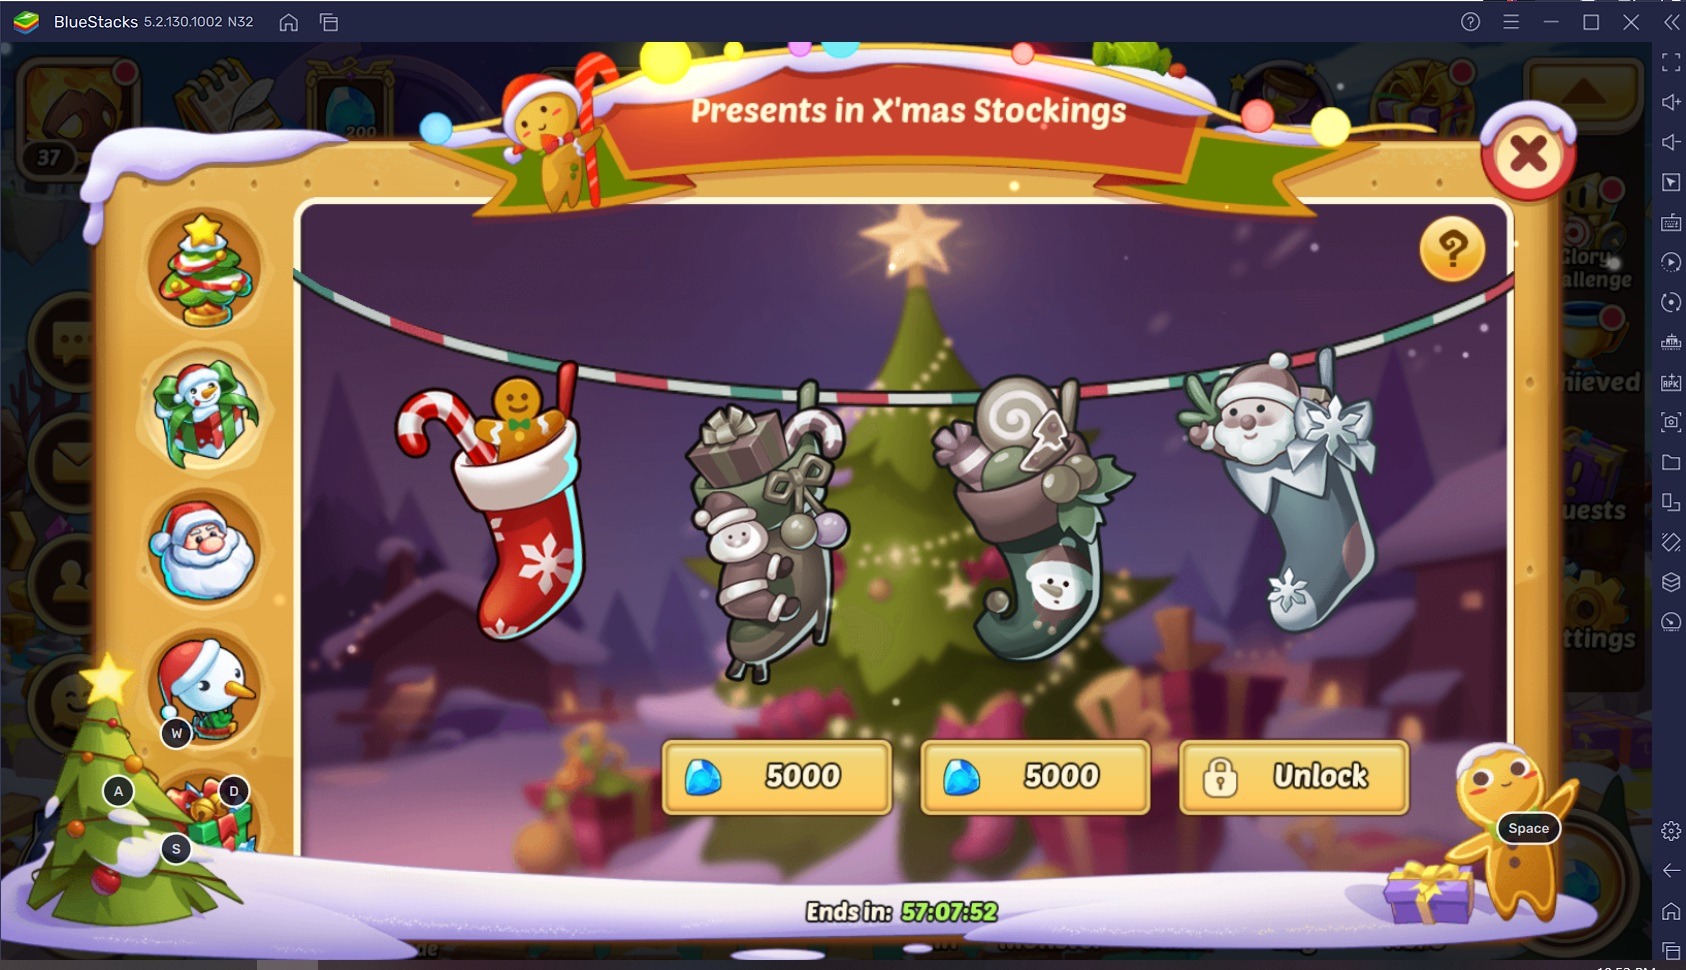 Idle Heroes: More Christmas Events are Added in the Idle Continent!